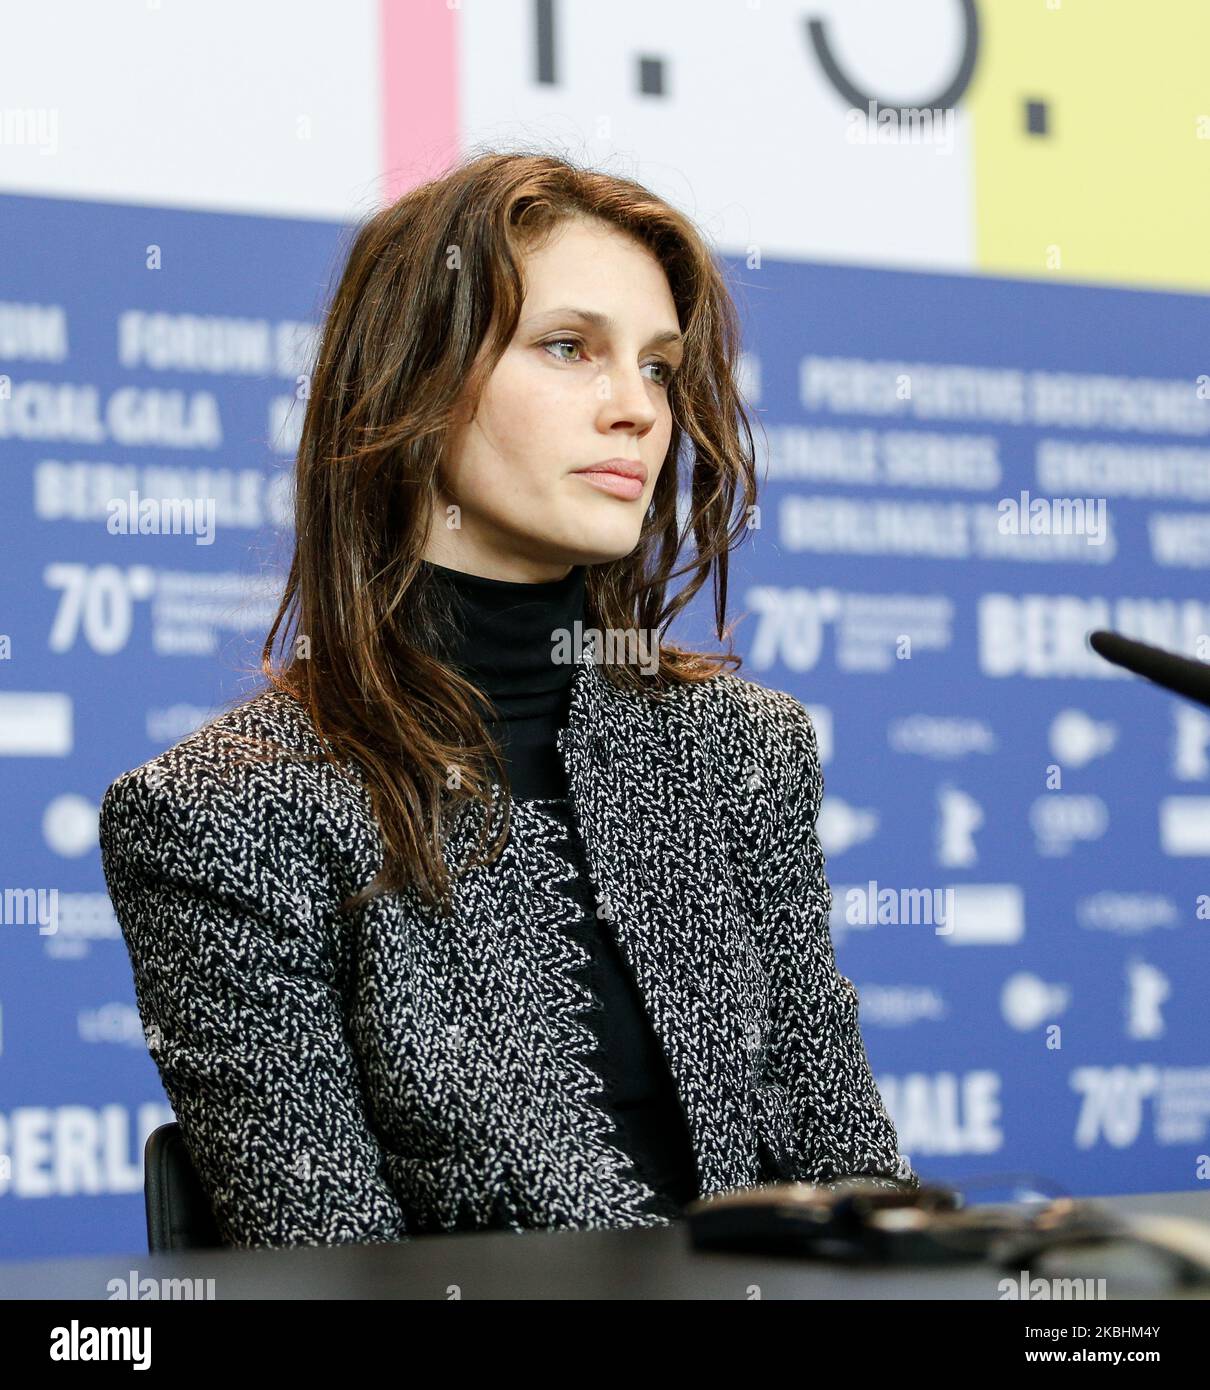 Actress Marine Vacth attends 'Pinocchio' press conference during 70th Berlinale International Film Festival in Grand Hyatt in Berlin, Germany on February 23, 2020.' (Photo by Dominika Zarzycka/NurPhoto) Stock Photo